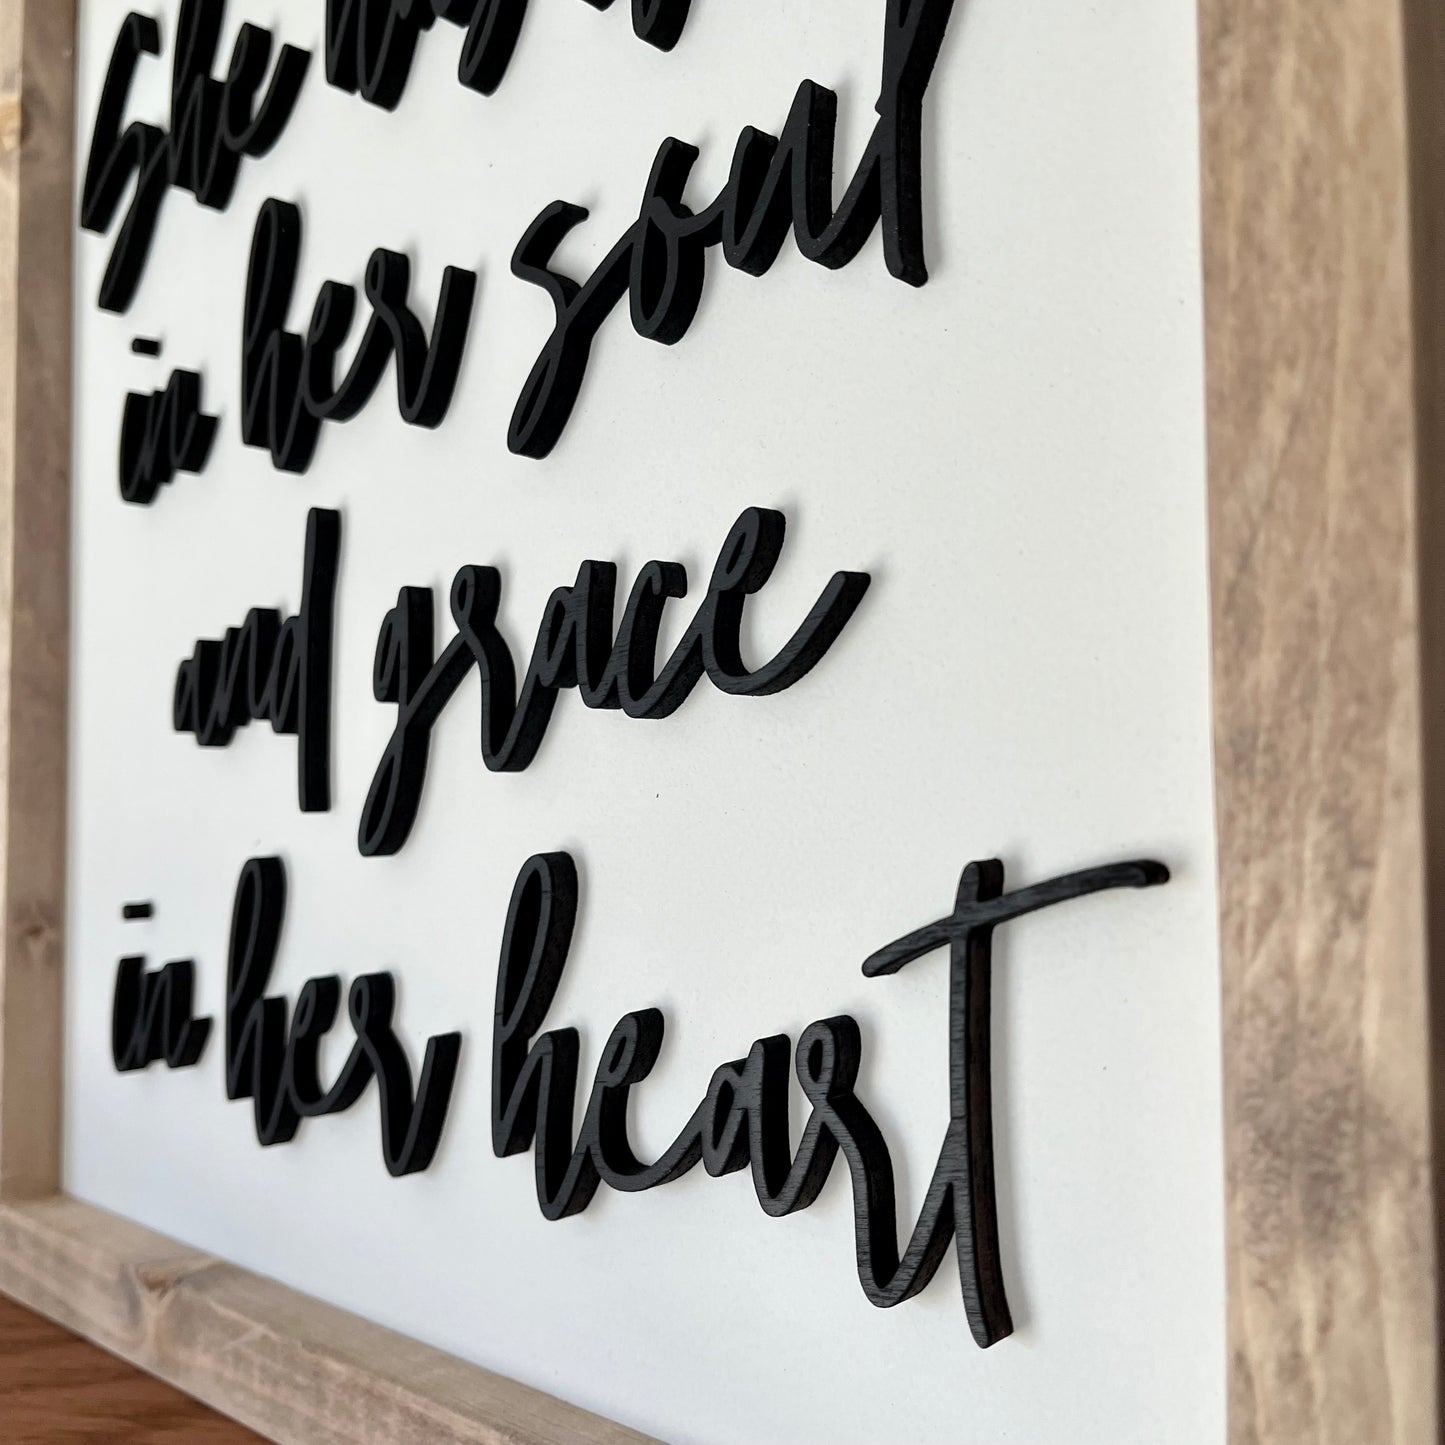 She has fire in her soul 3D wood sign